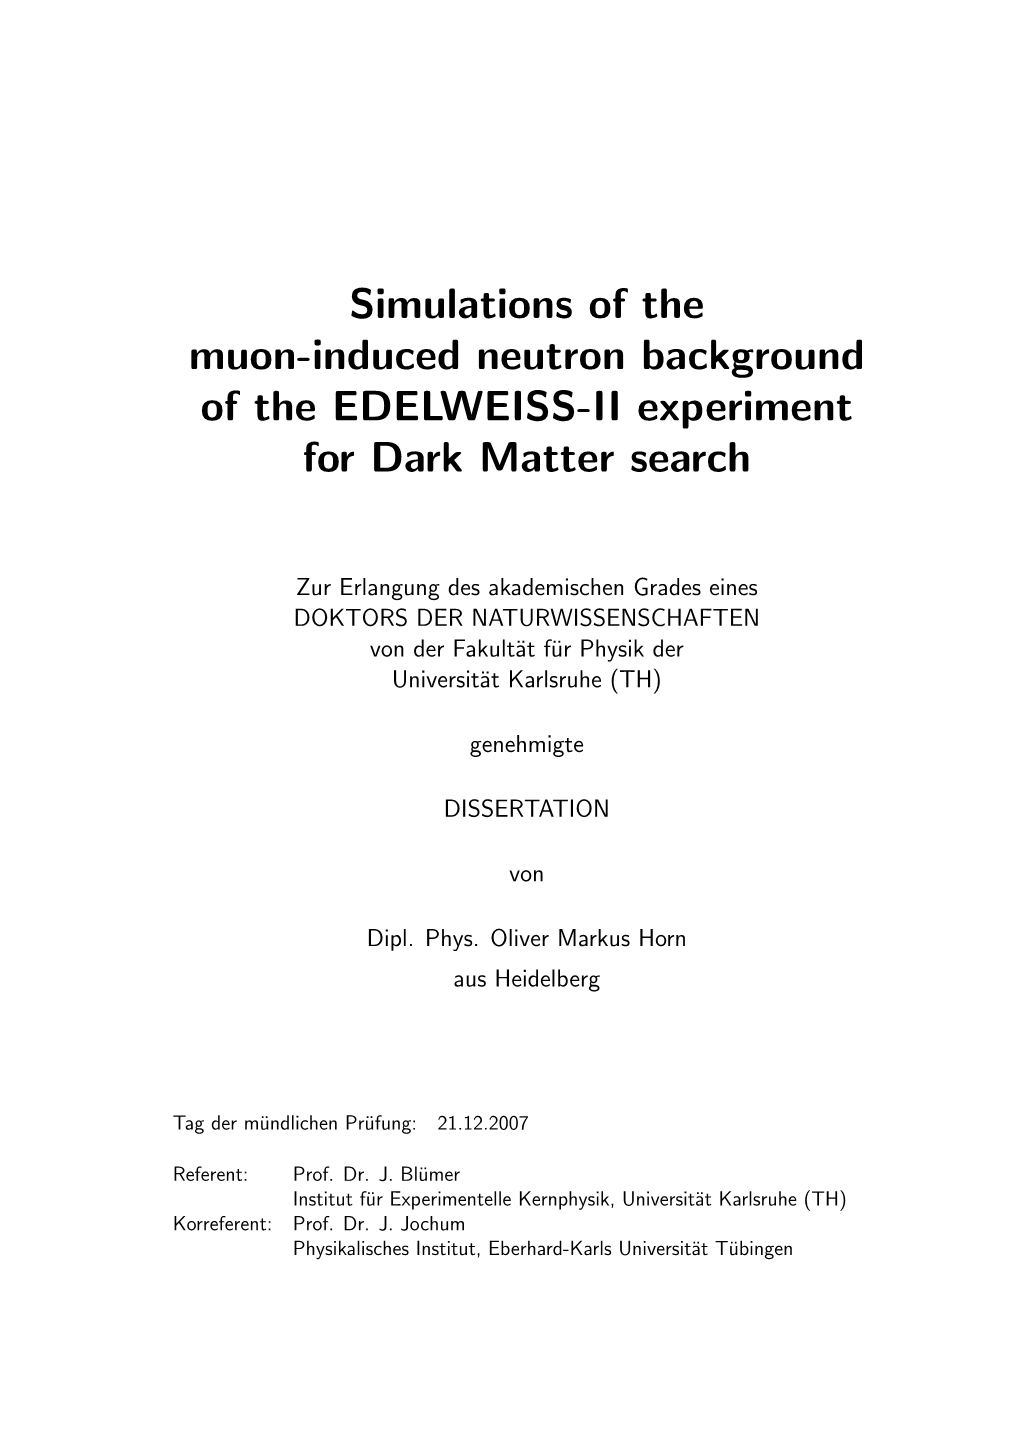 Simulations of Muon-Induced Neutron Background of the EDELWEISS-II